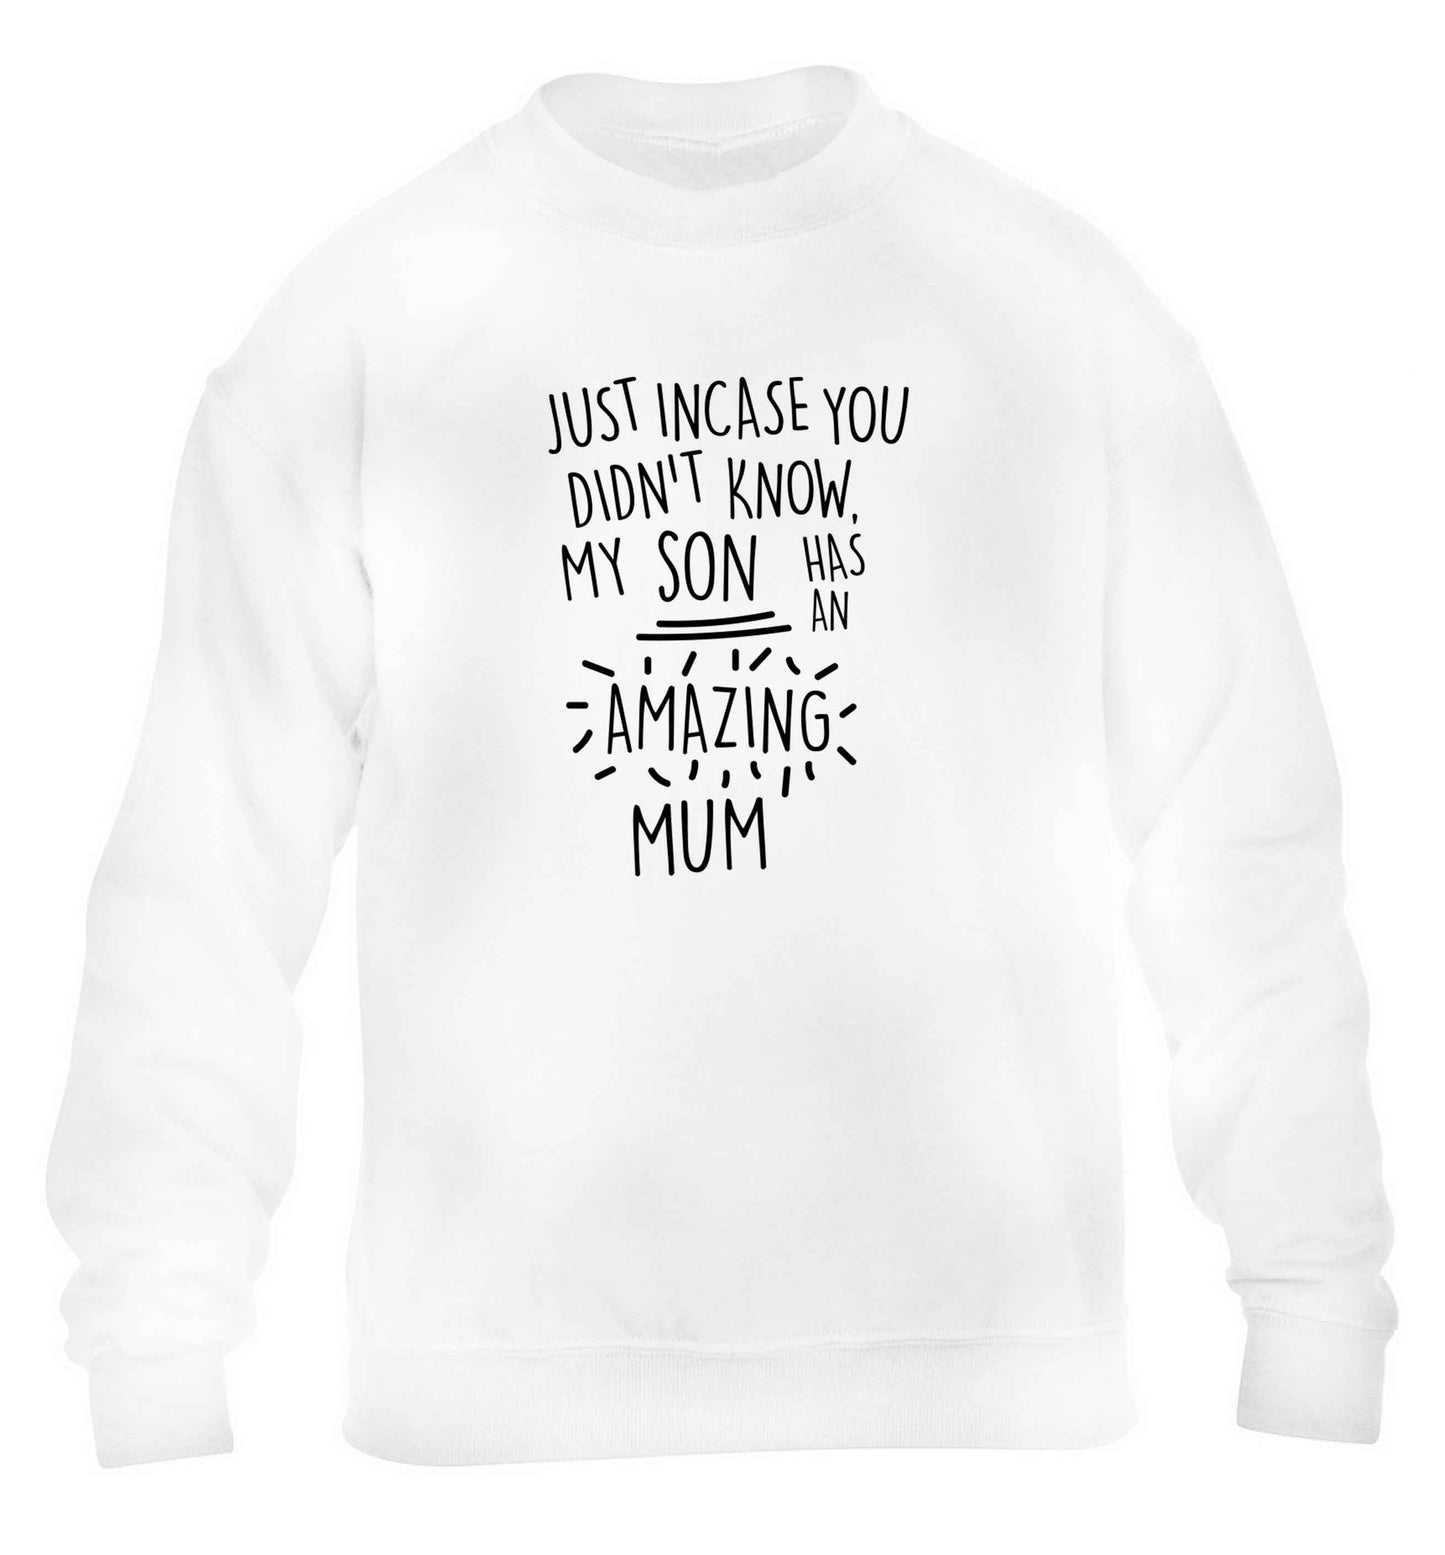 Just incase you didn't know my son has an amazing mum children's white sweater 12-13 Years